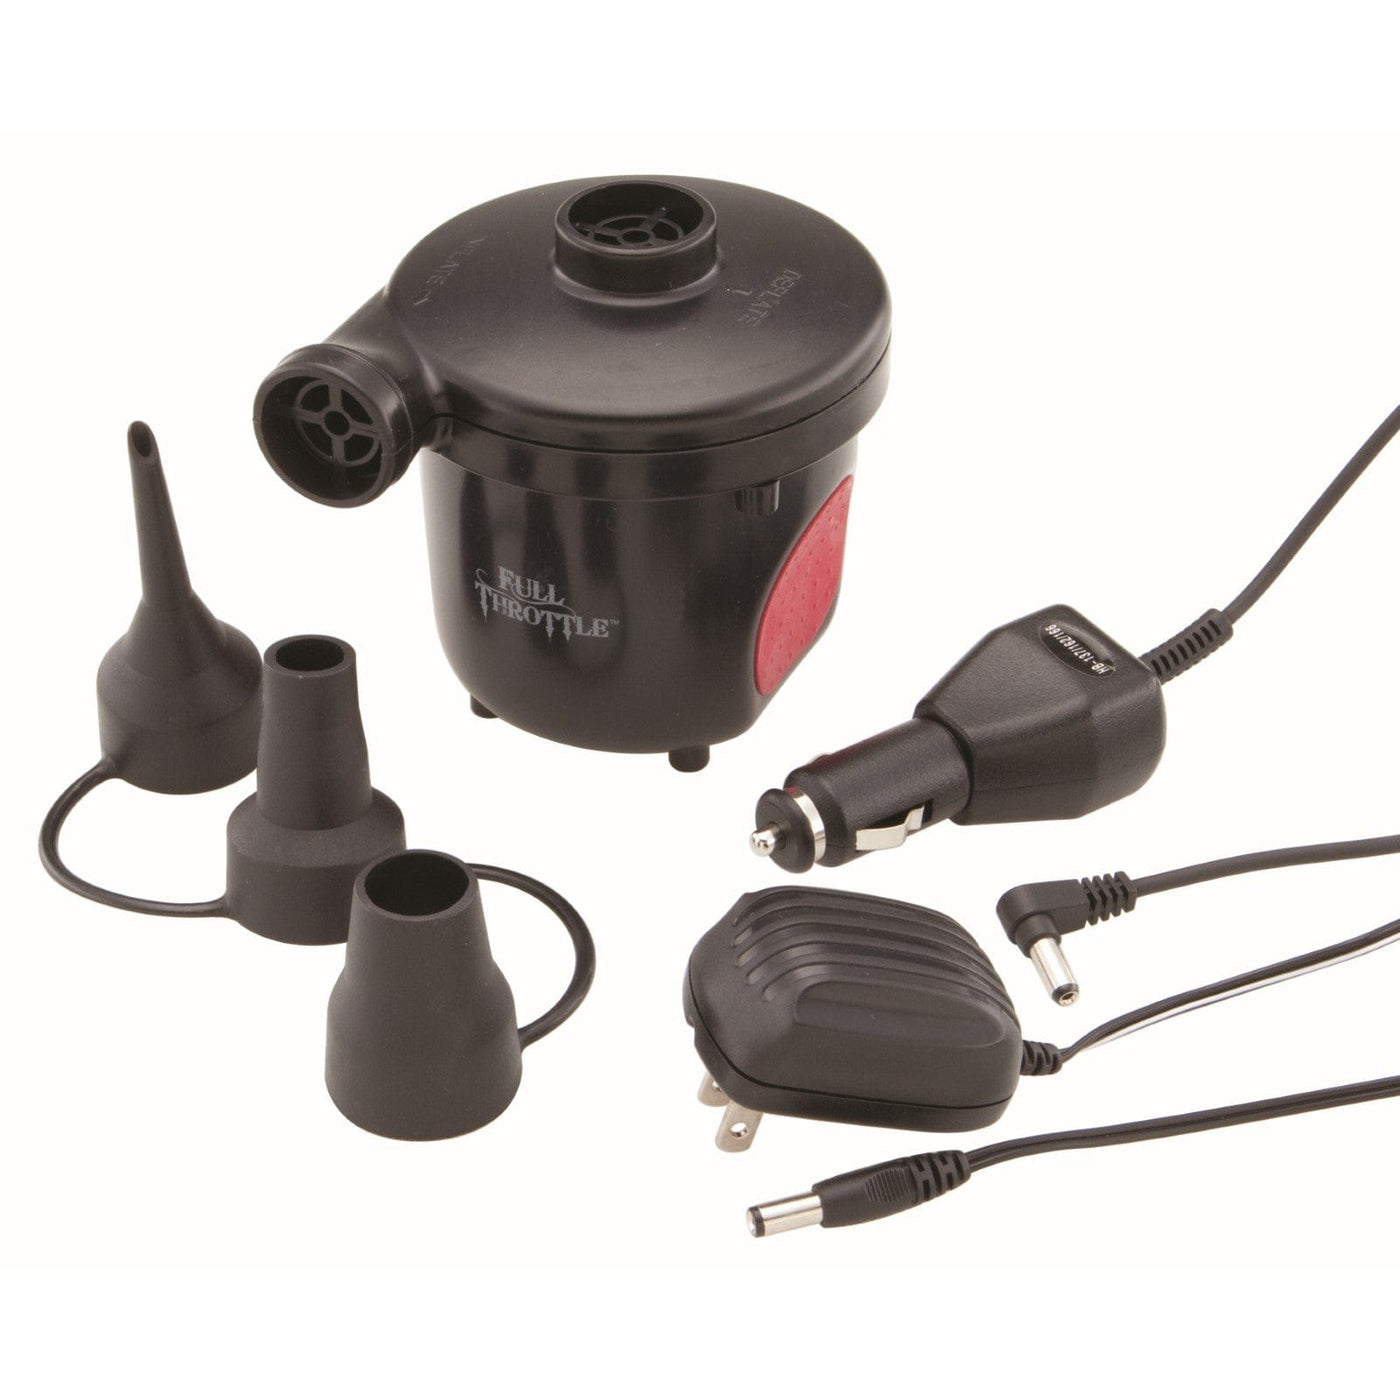 Full Throttle Full Throttle Rechargeable Air Pump Marine And Water Sports